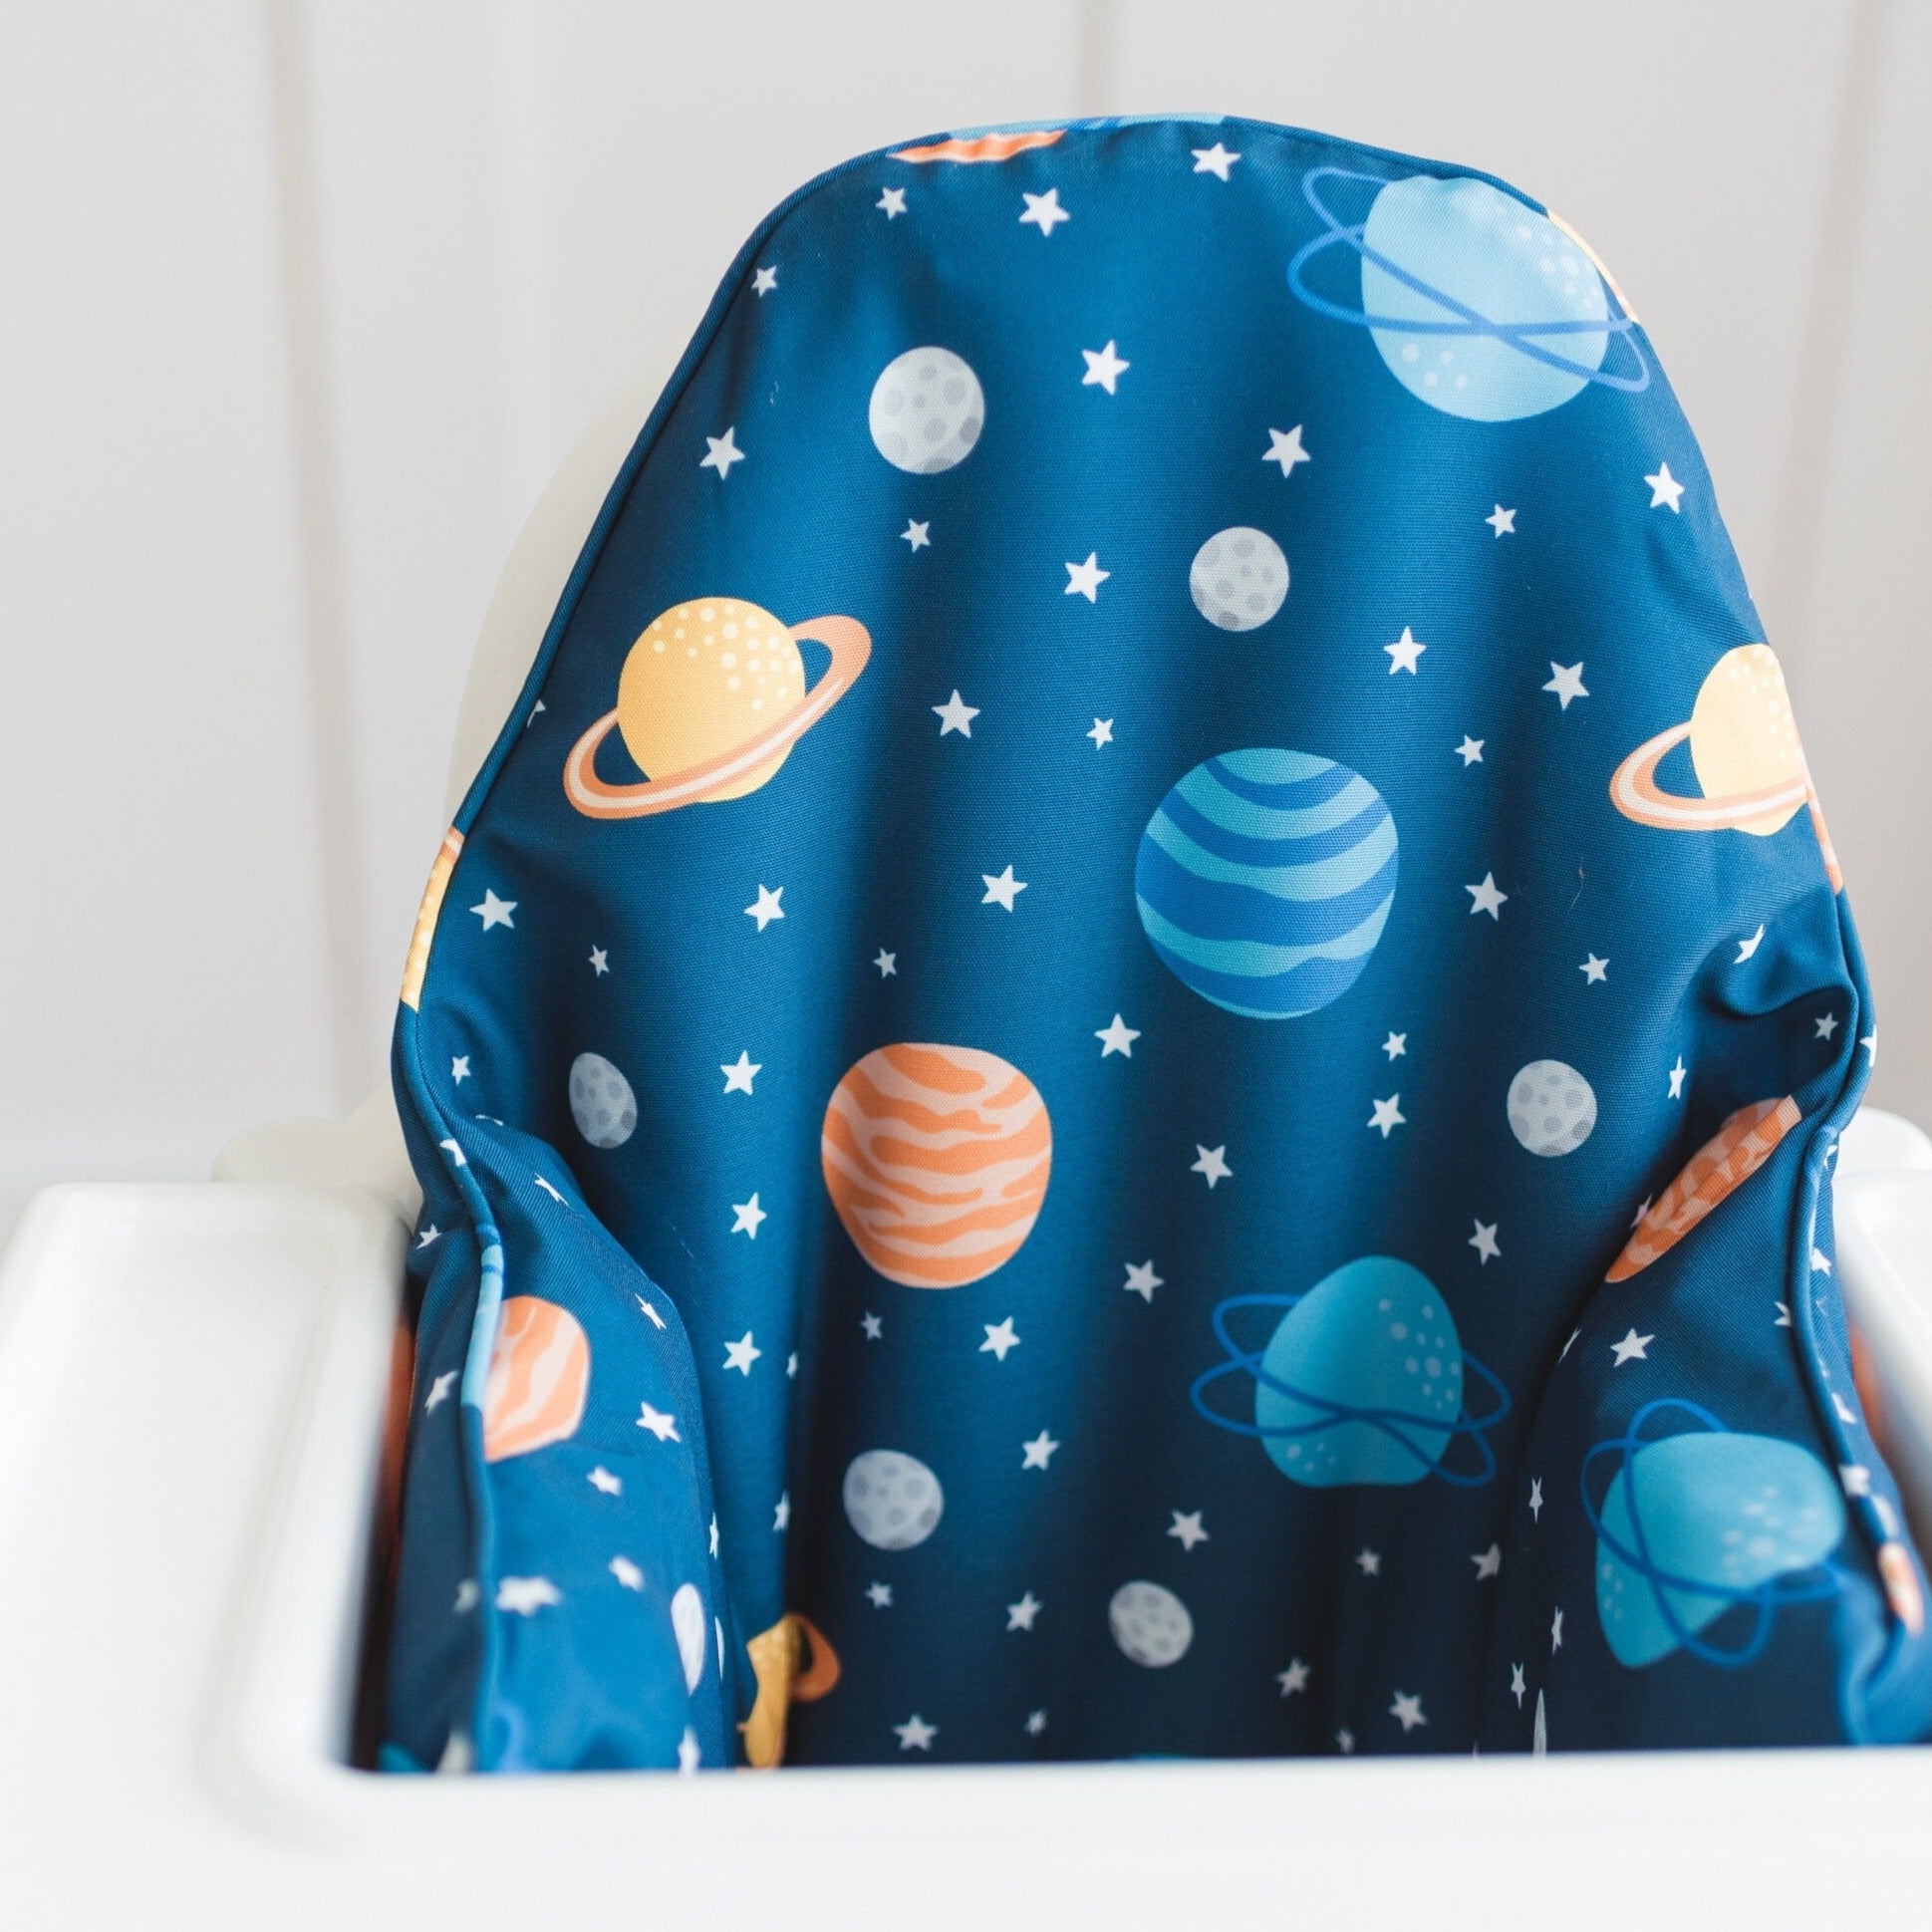 Space Cushion Cover for the IKEA Antilop Highchair